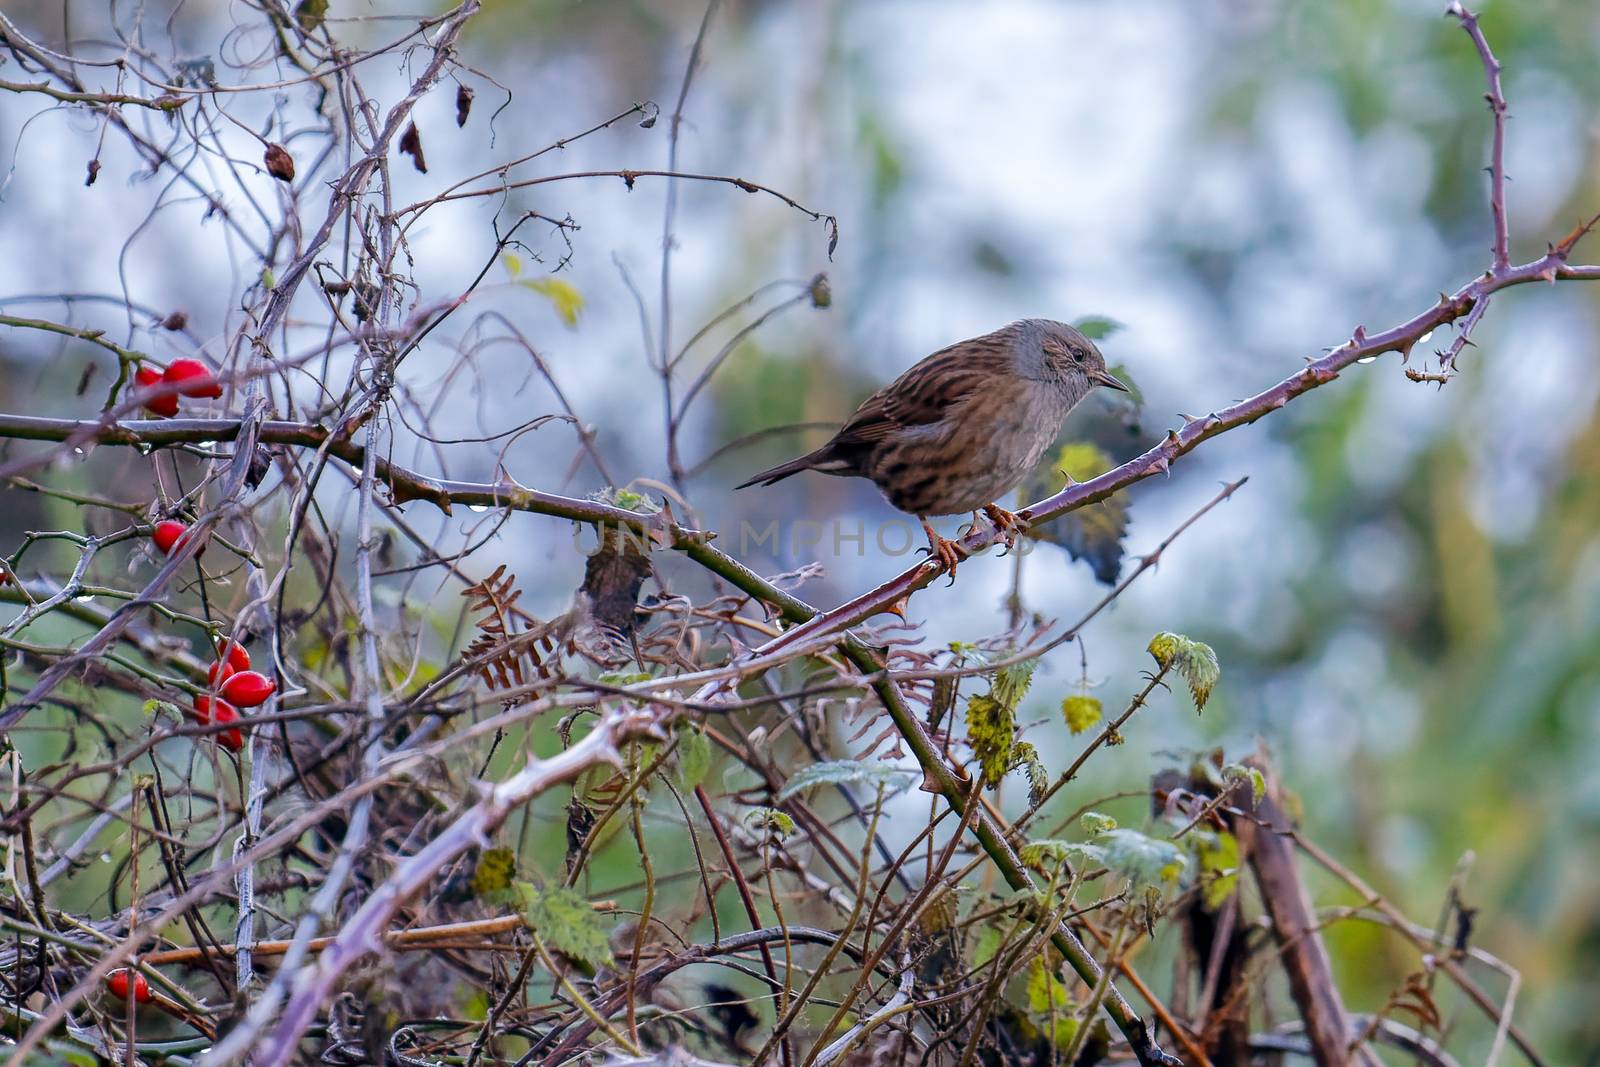 Hedge Accentor or Dunnock on a briar in winter